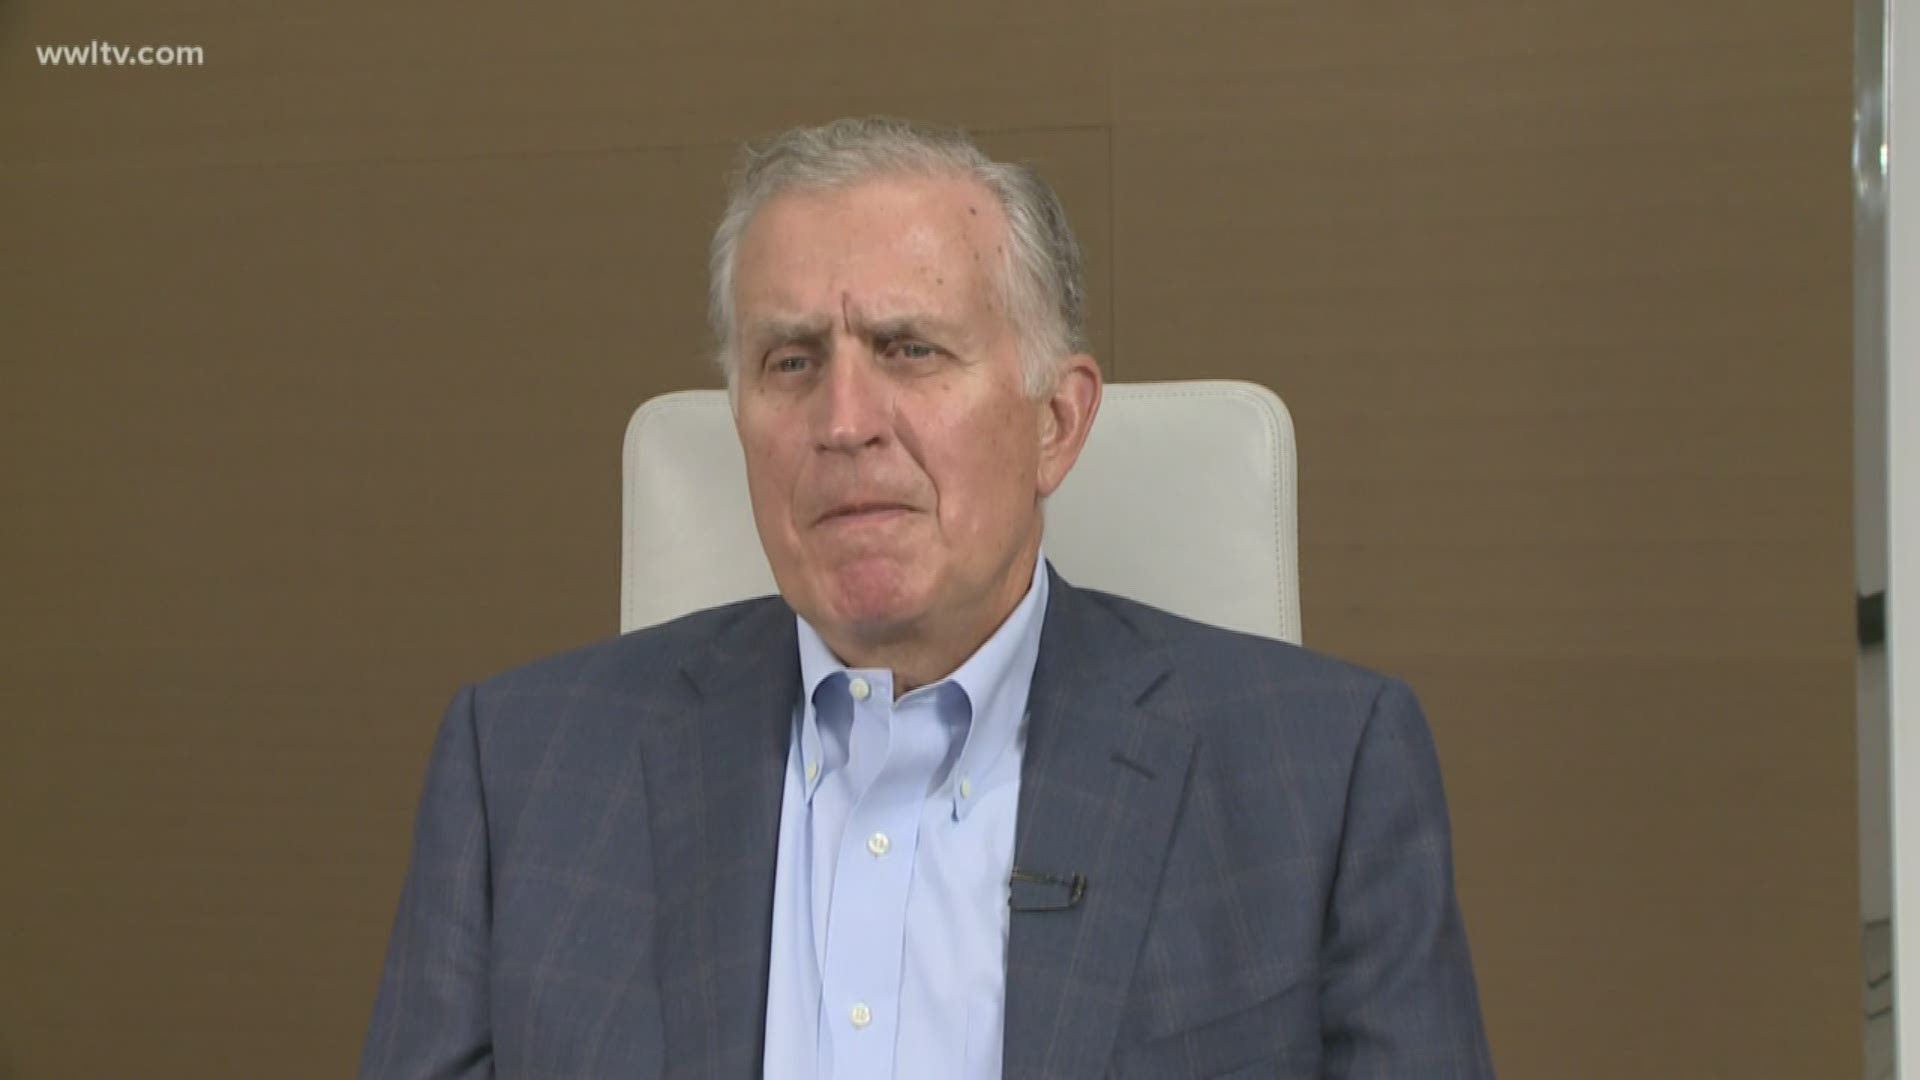 Former NFL Commissioner Paul Tagliabue elected to Pro Football Hall of Fame